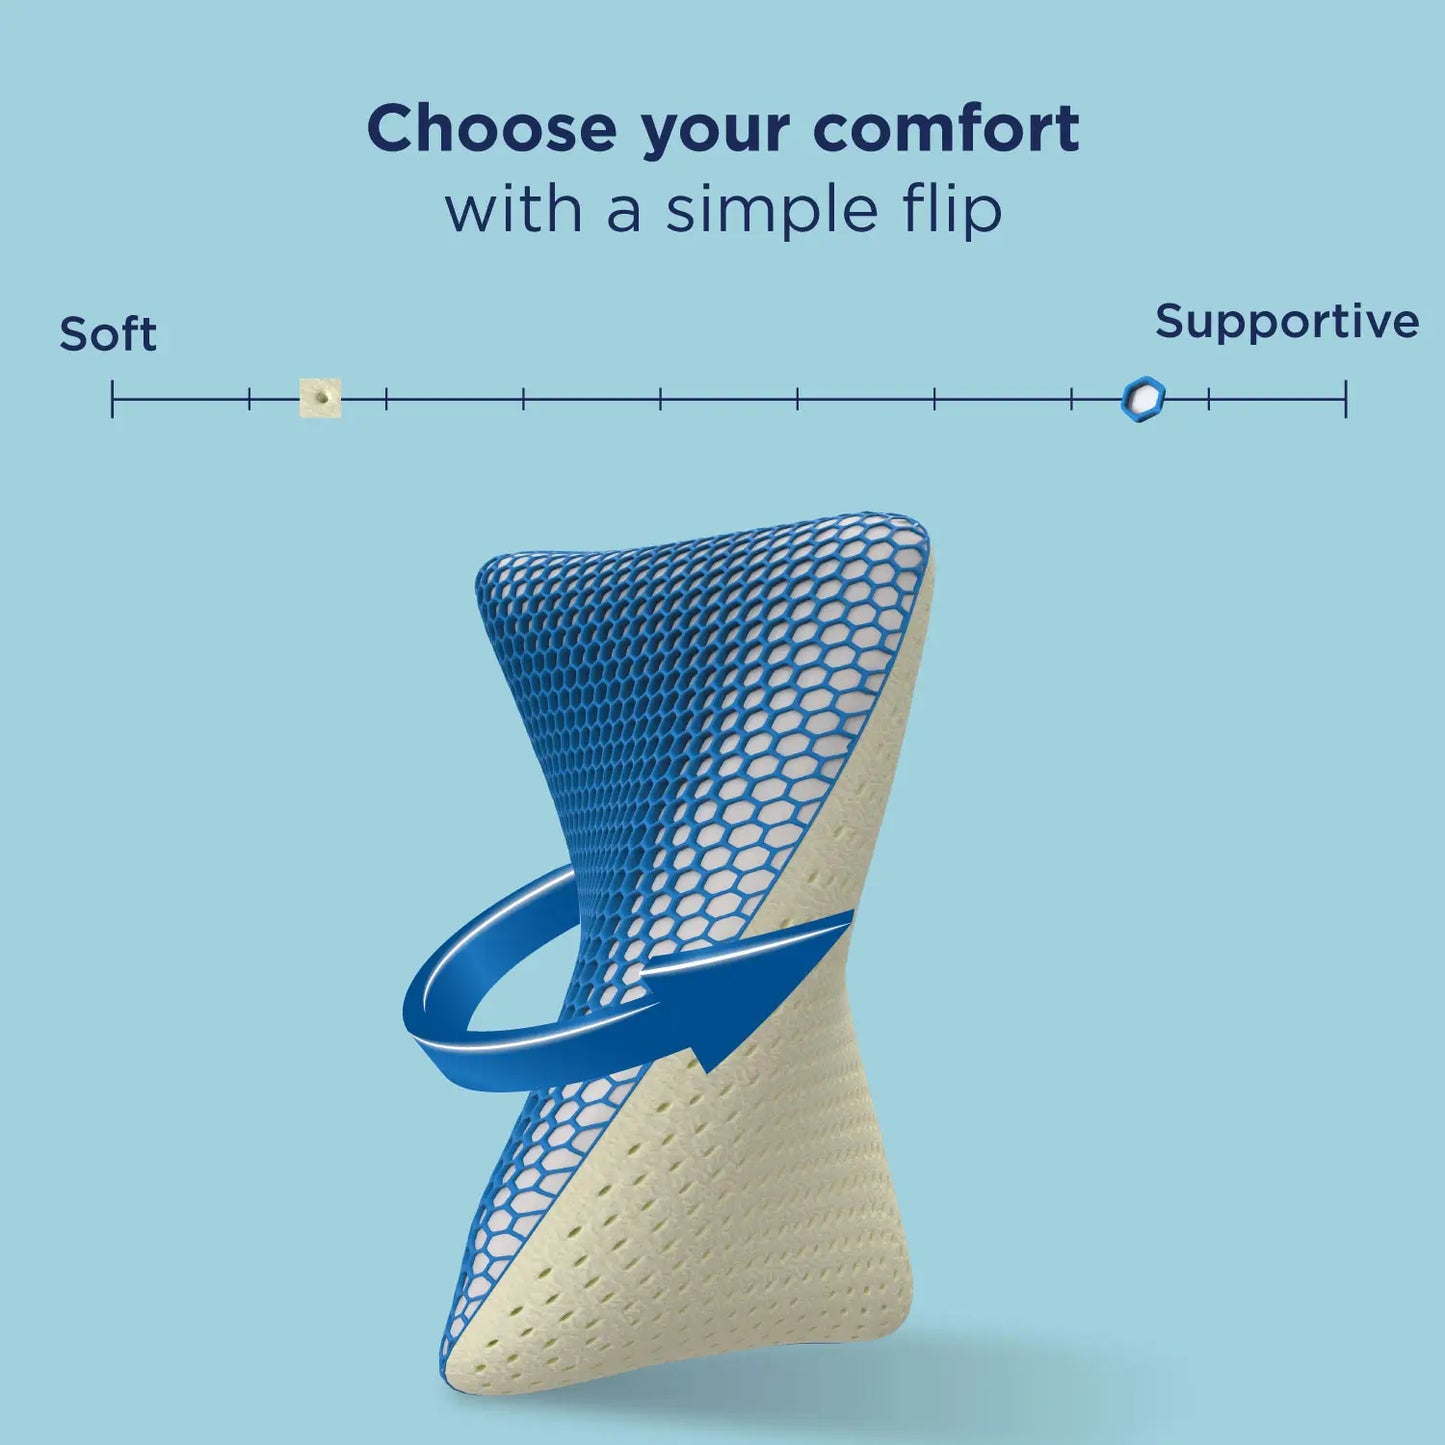 Choose your comfort with a simple flip